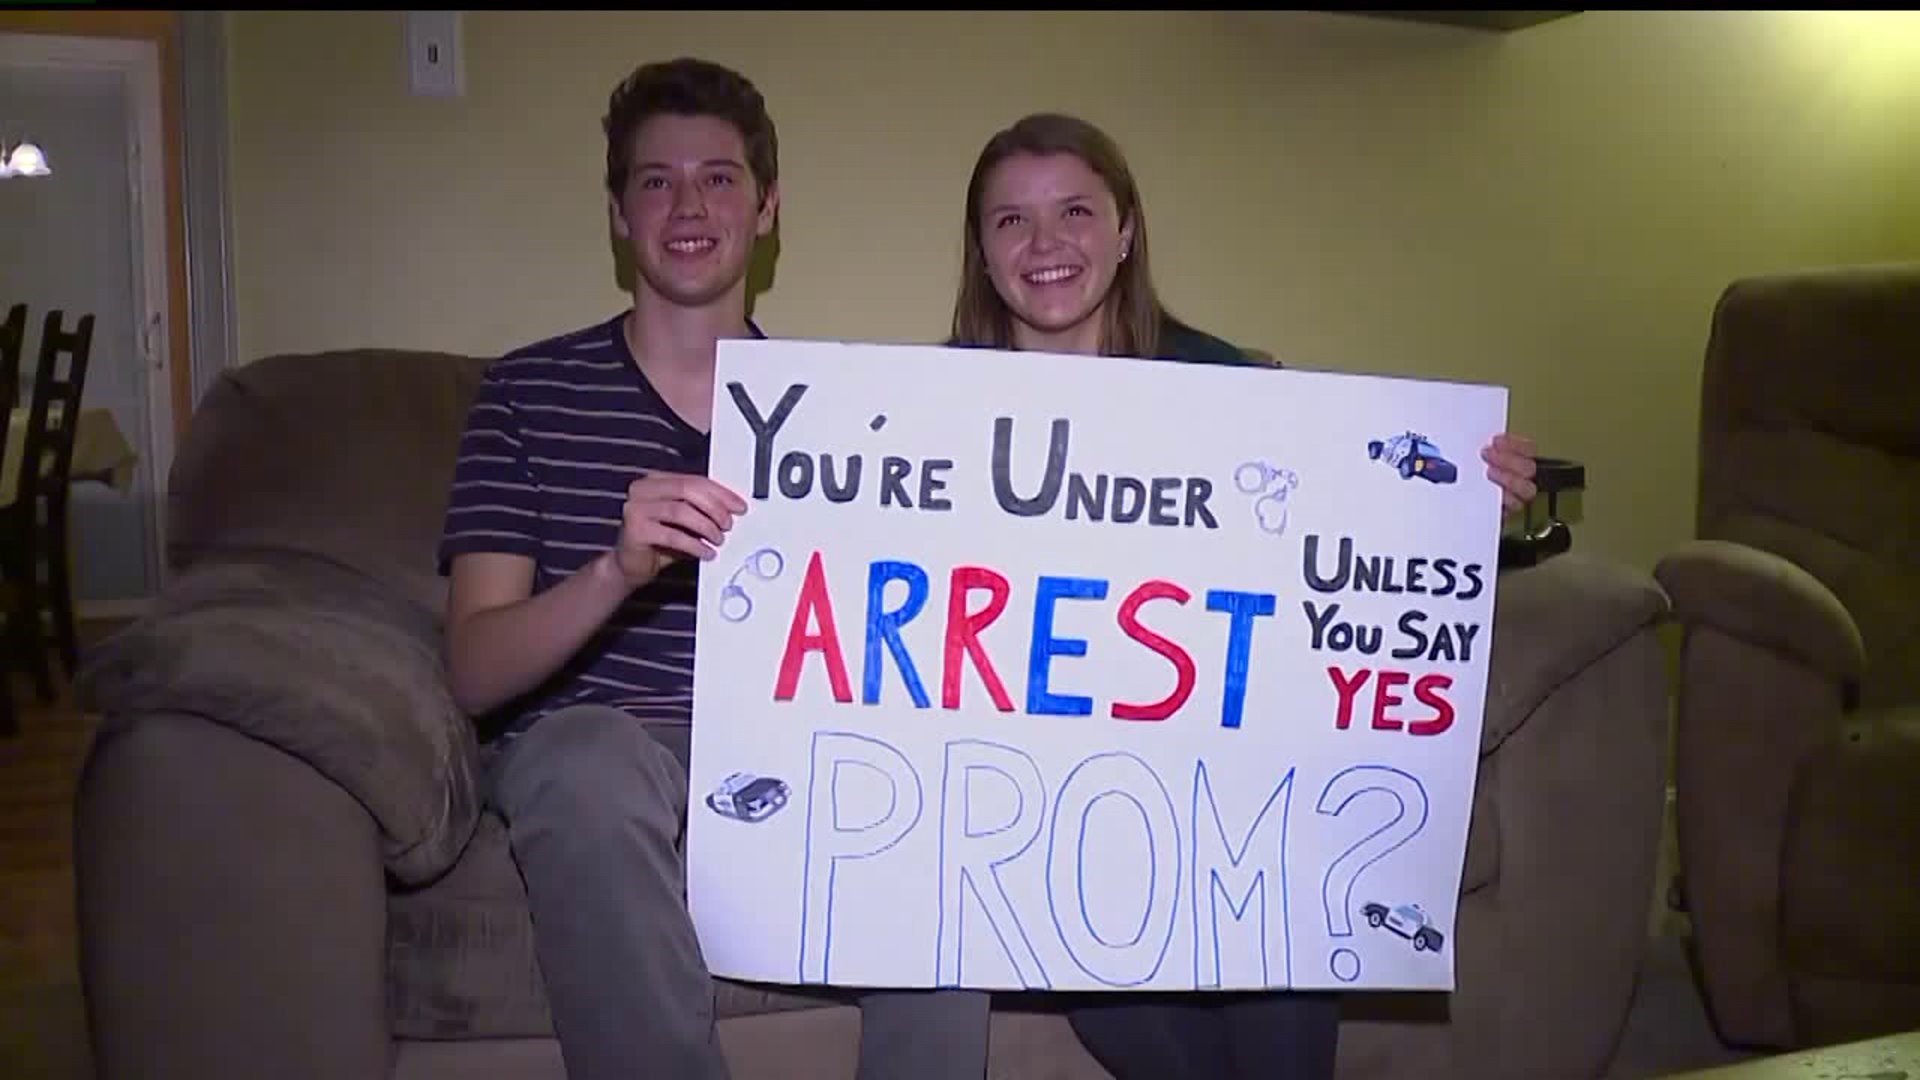 Lancaster Co. student gives girlfriend arresting prom-posal